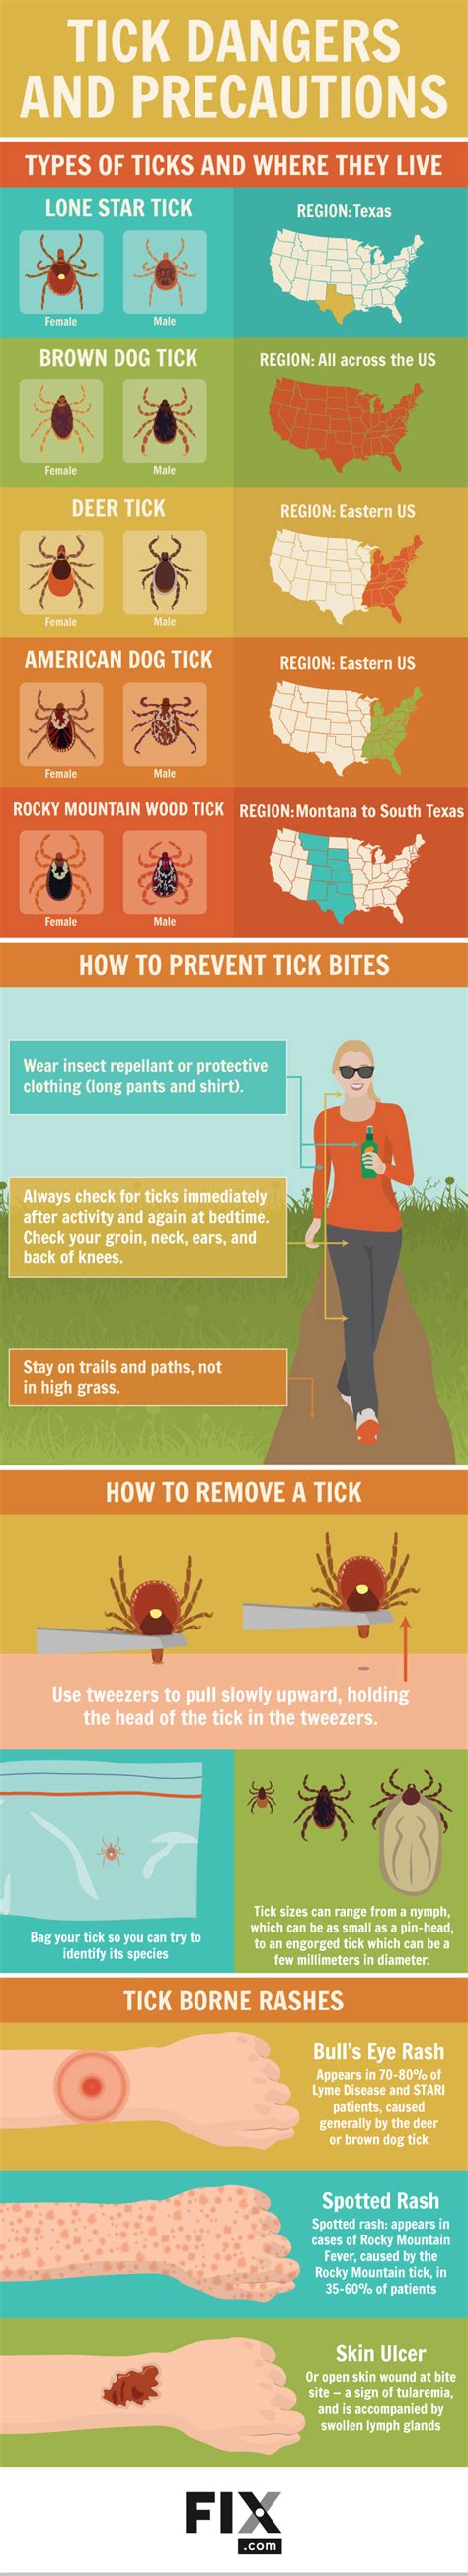 Tick Dangers And Precautions Learn To Identify And Prevent Tick Bites